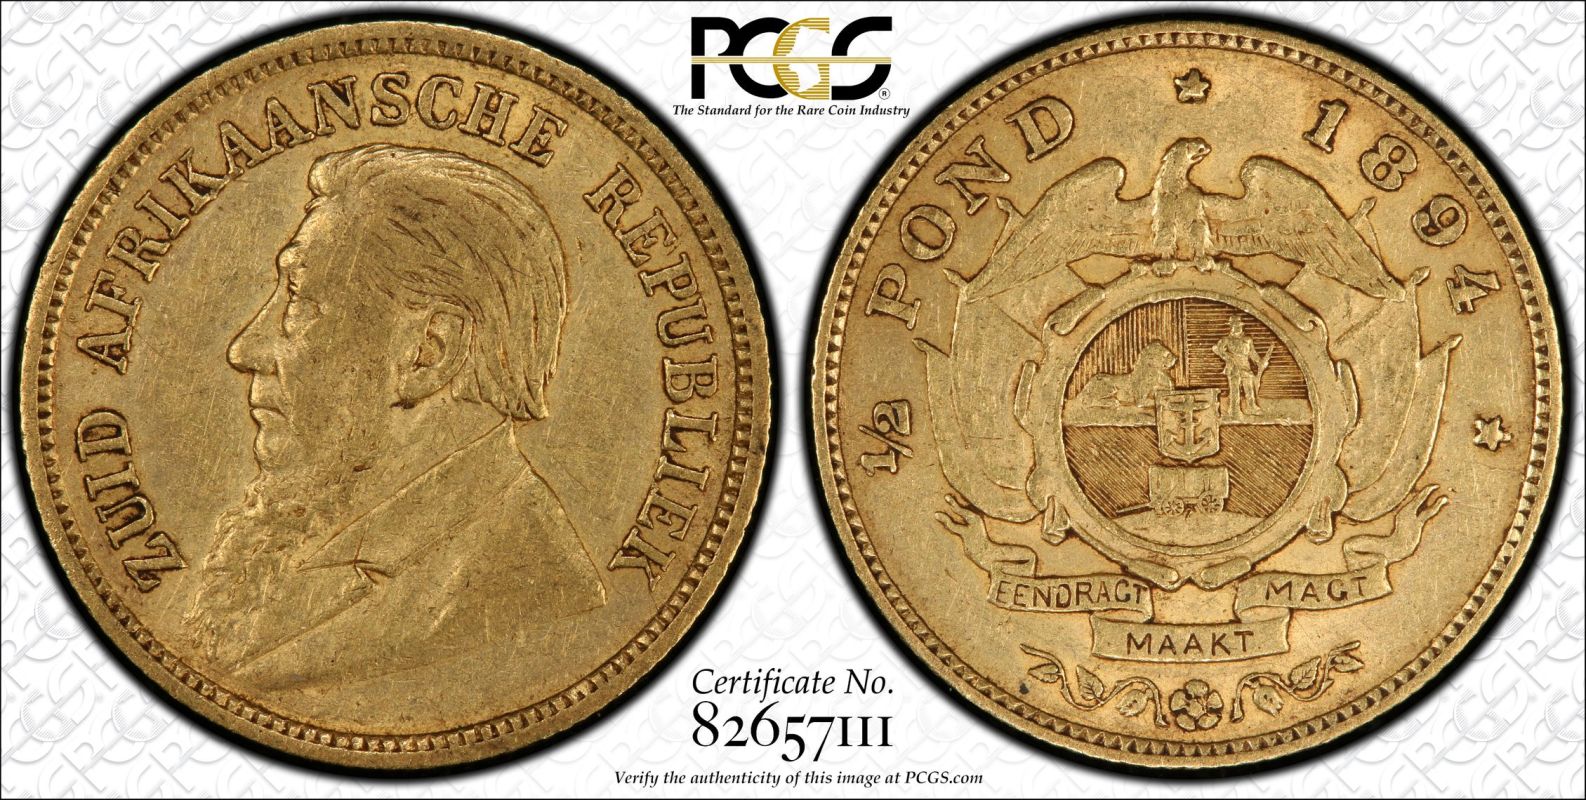 South Africa Paul Kruger 1894 Gold 1/2 Pond single shaft PCGS XF45 - Image 4 of 5